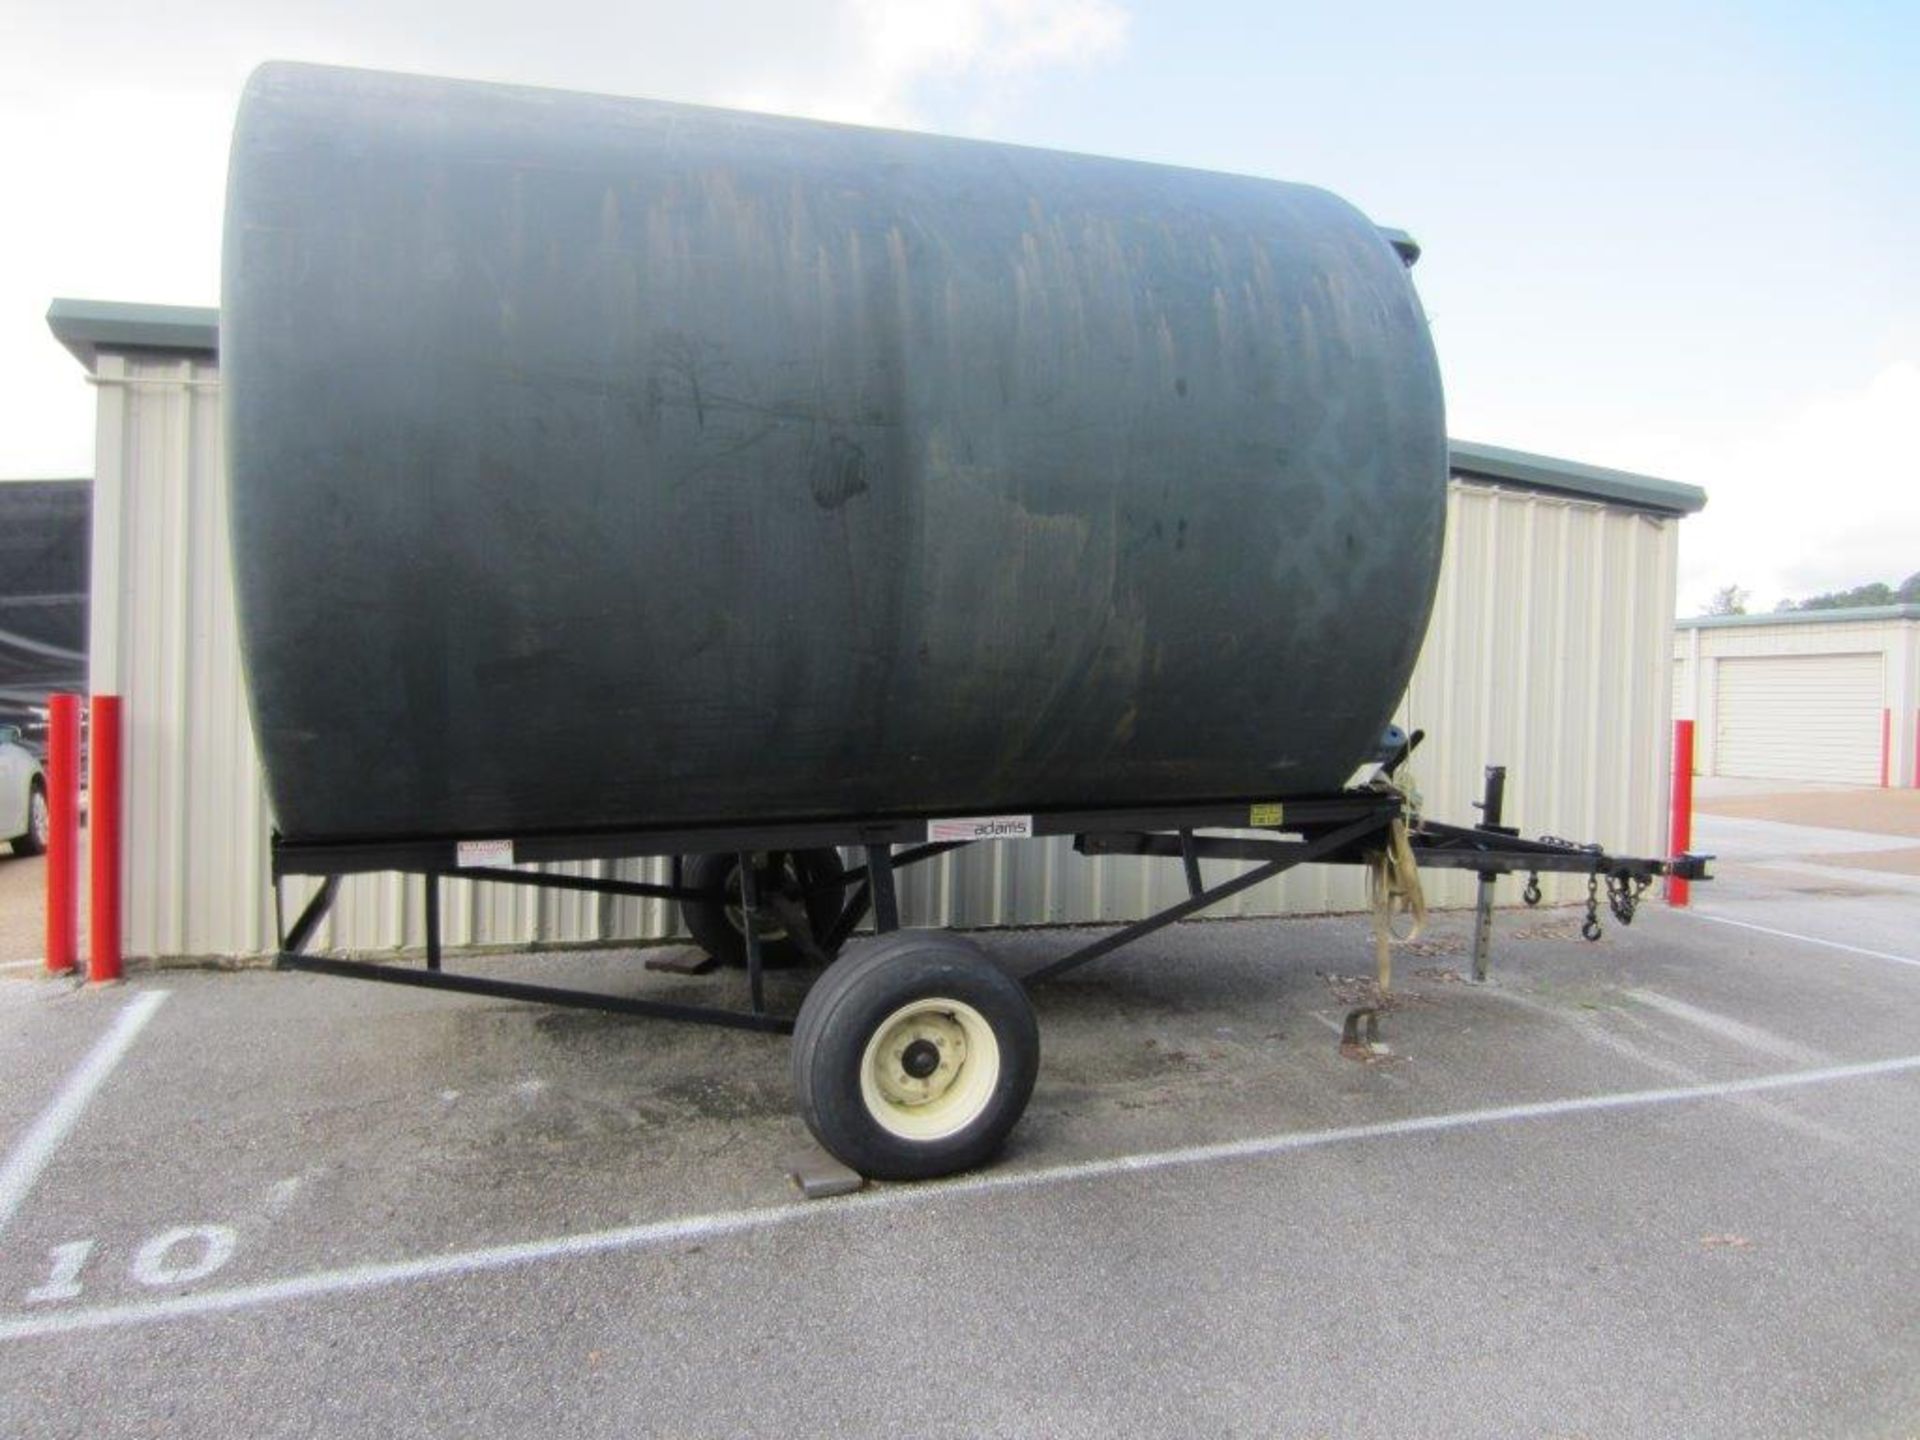 ADAMS SINGLE AXLE TRAILER WITH OIL DRUM (SUBJECT TO GROUP LOT 7)